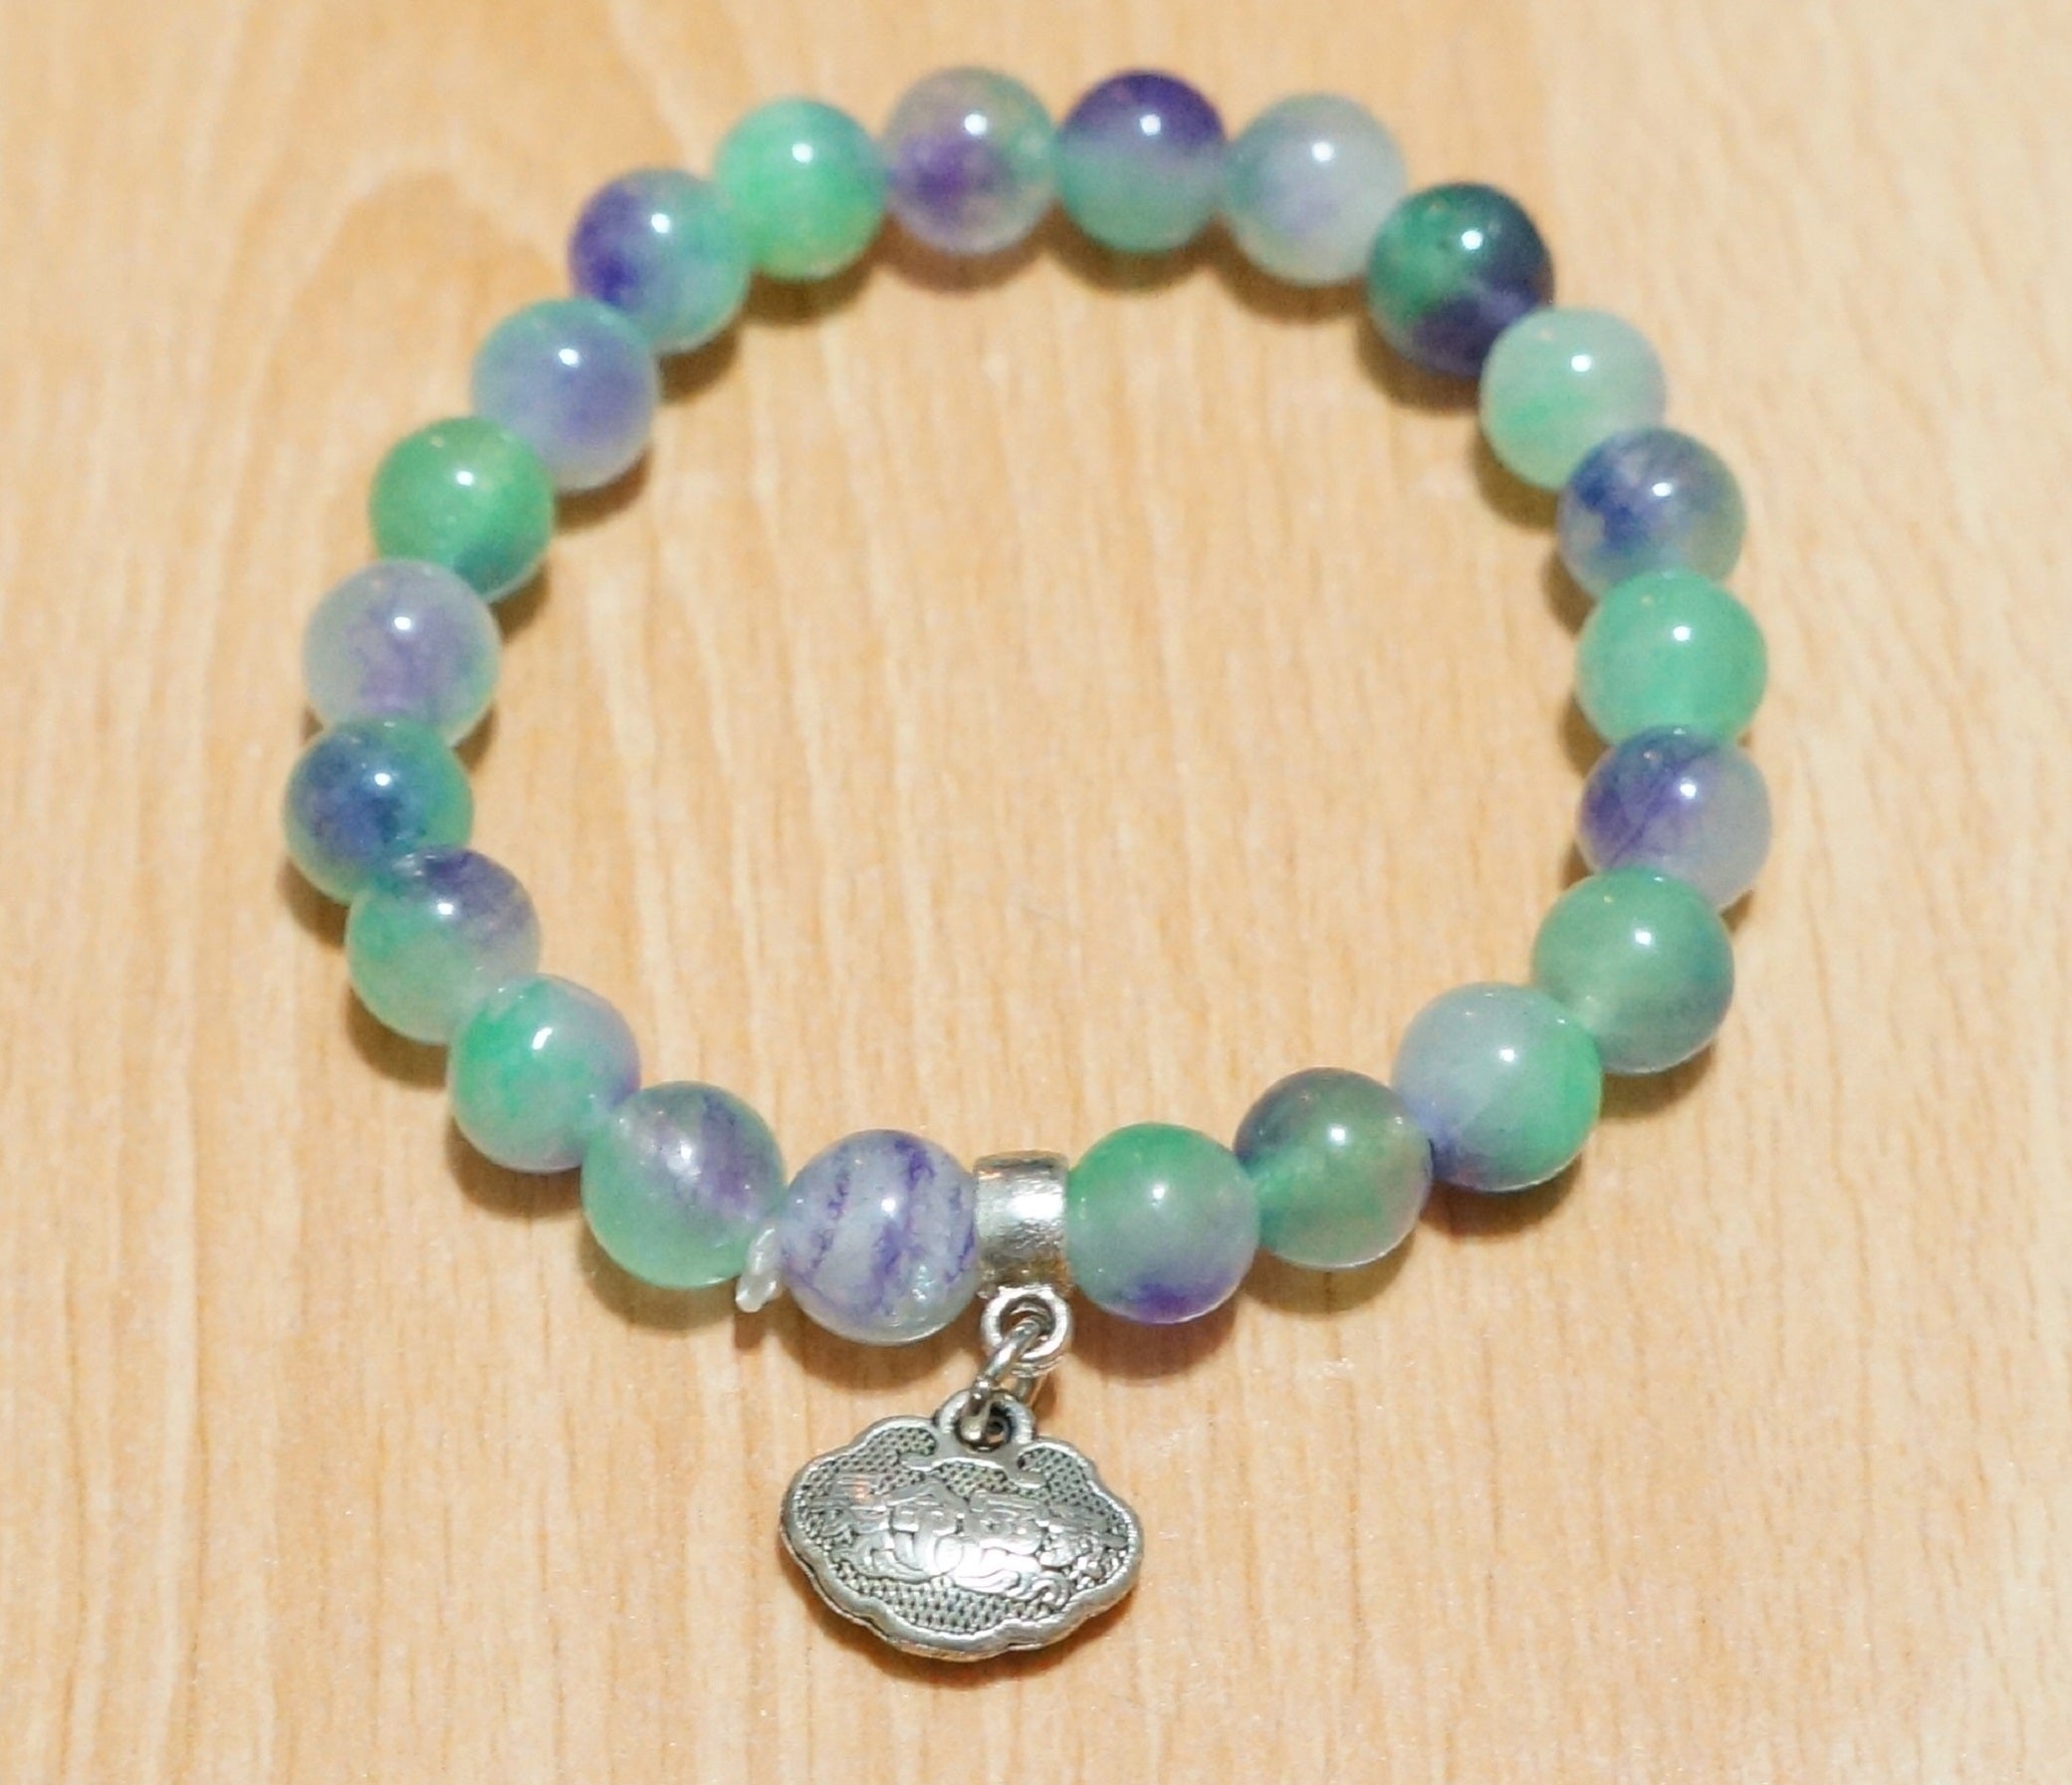 Bracelet - Jade with Chinese Charm